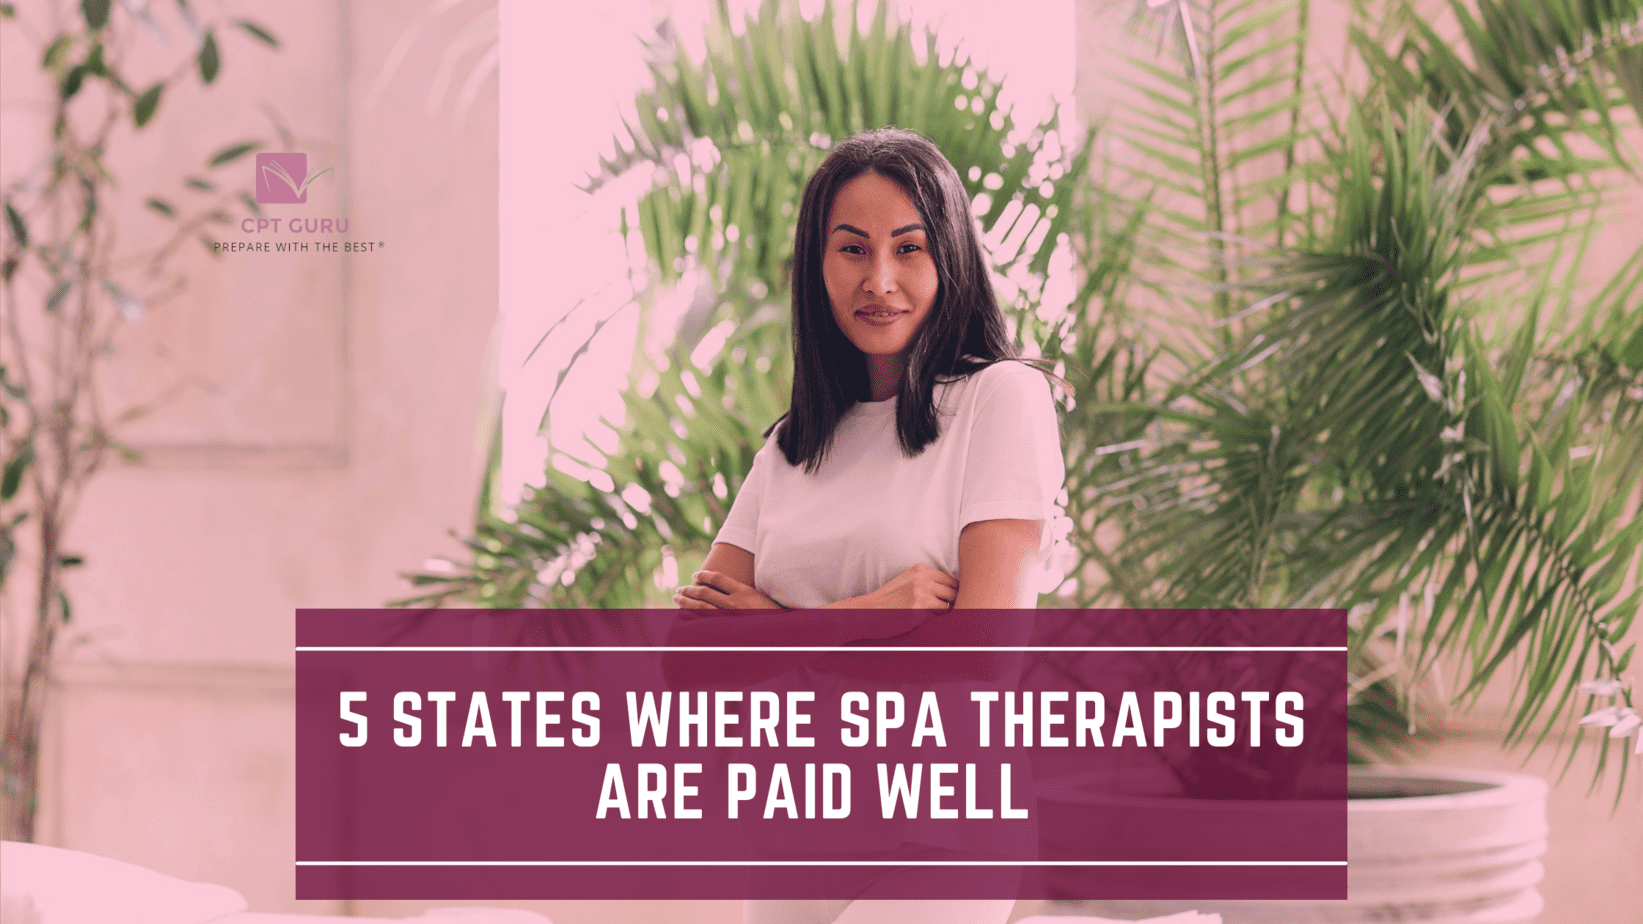 5 States Where Spa Therapists Are Paid Well